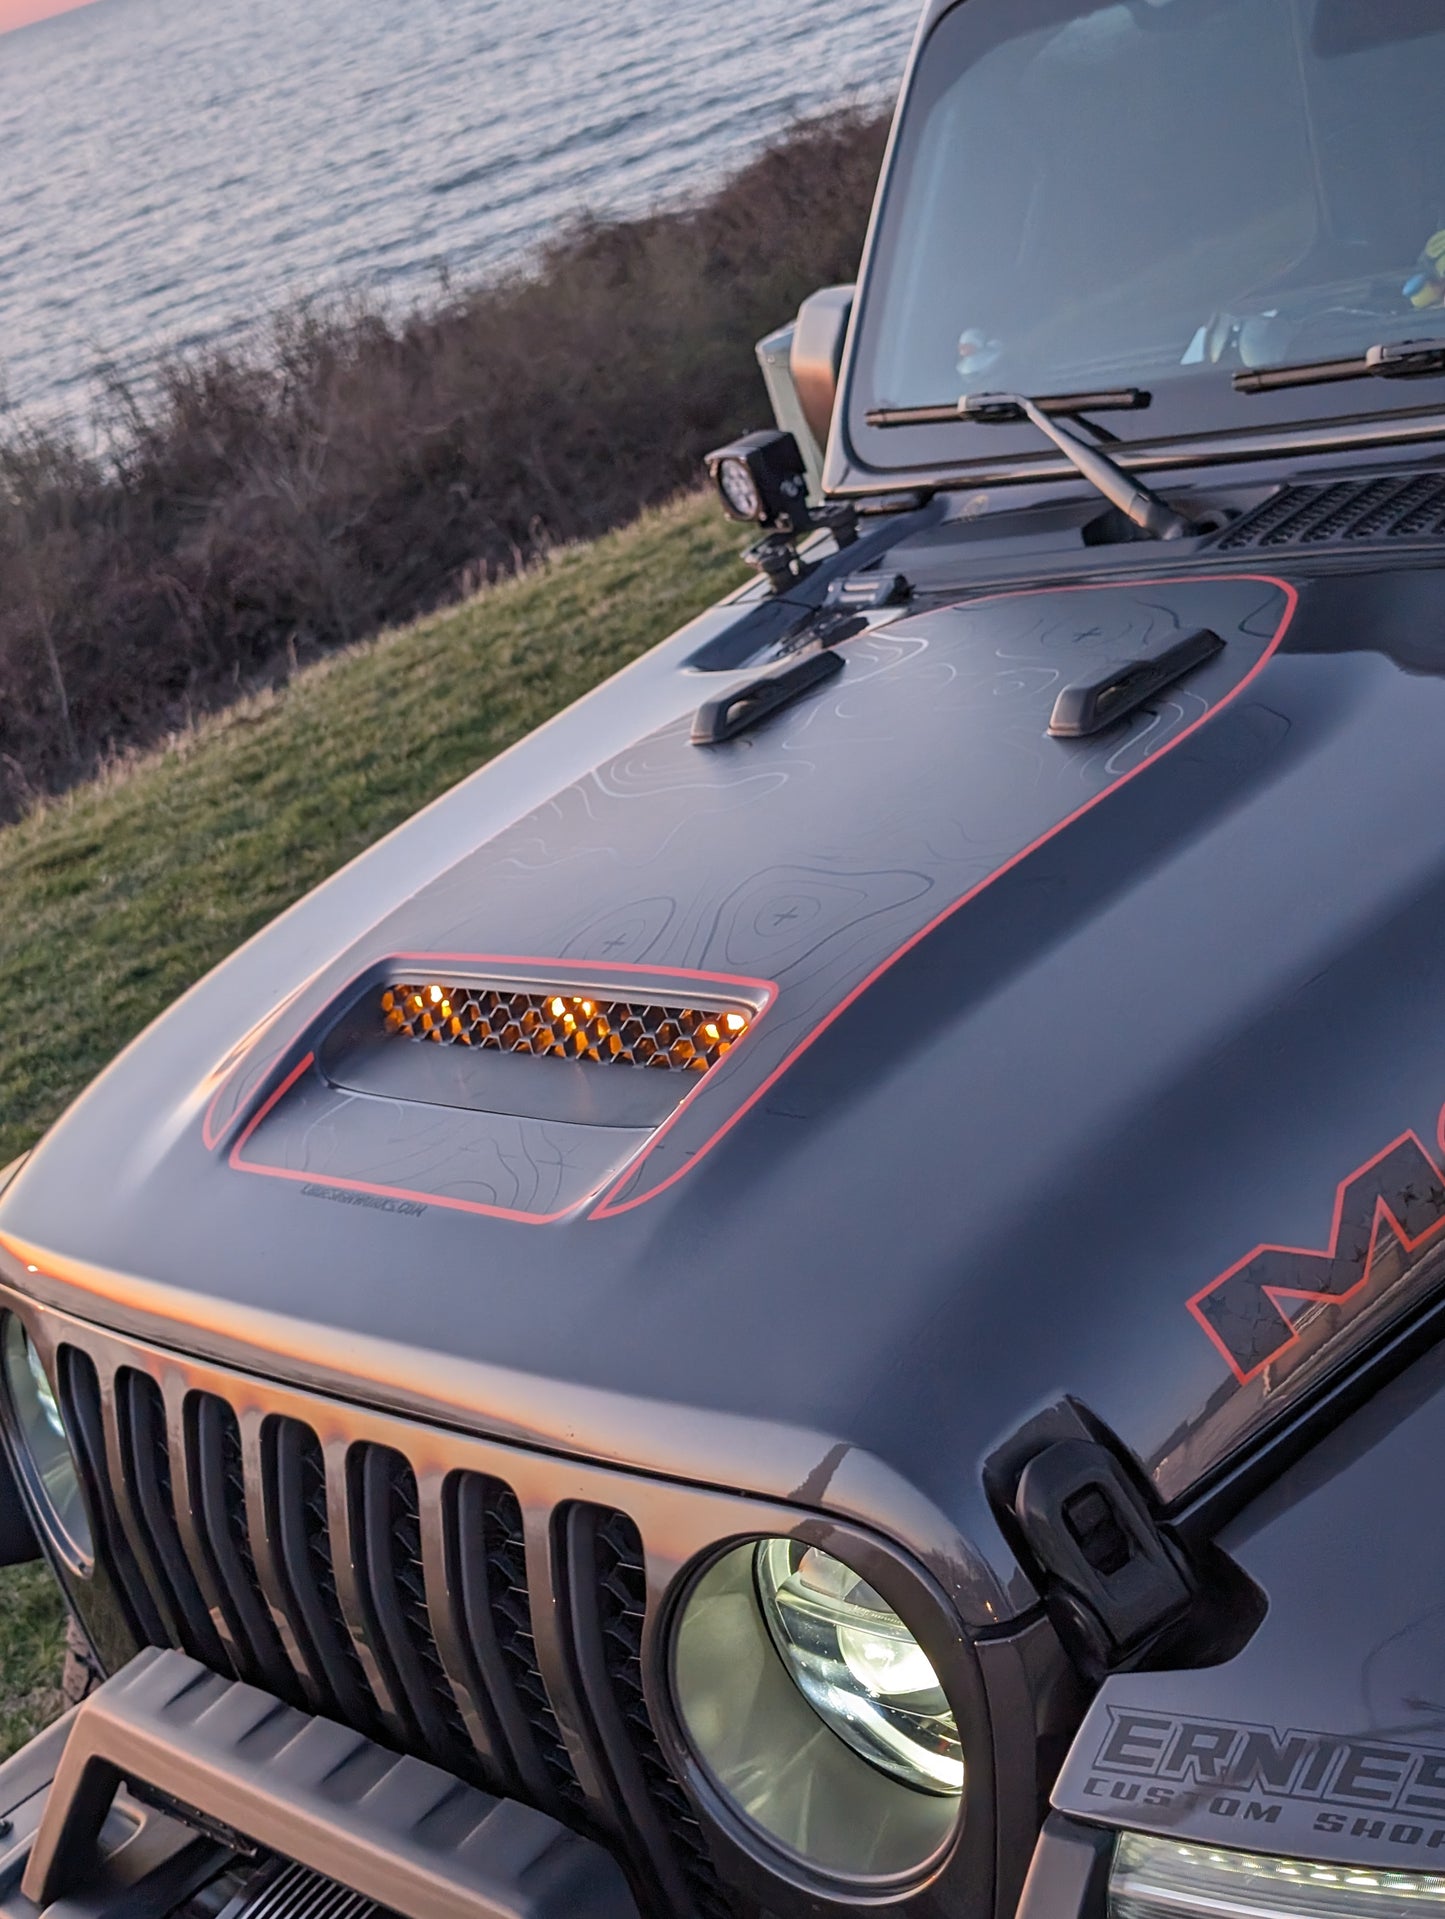 Topographical Mojave/392 Printed Blackout Hood Decal set- fits 2020 and newer Jeep Gladiator& Wrangler